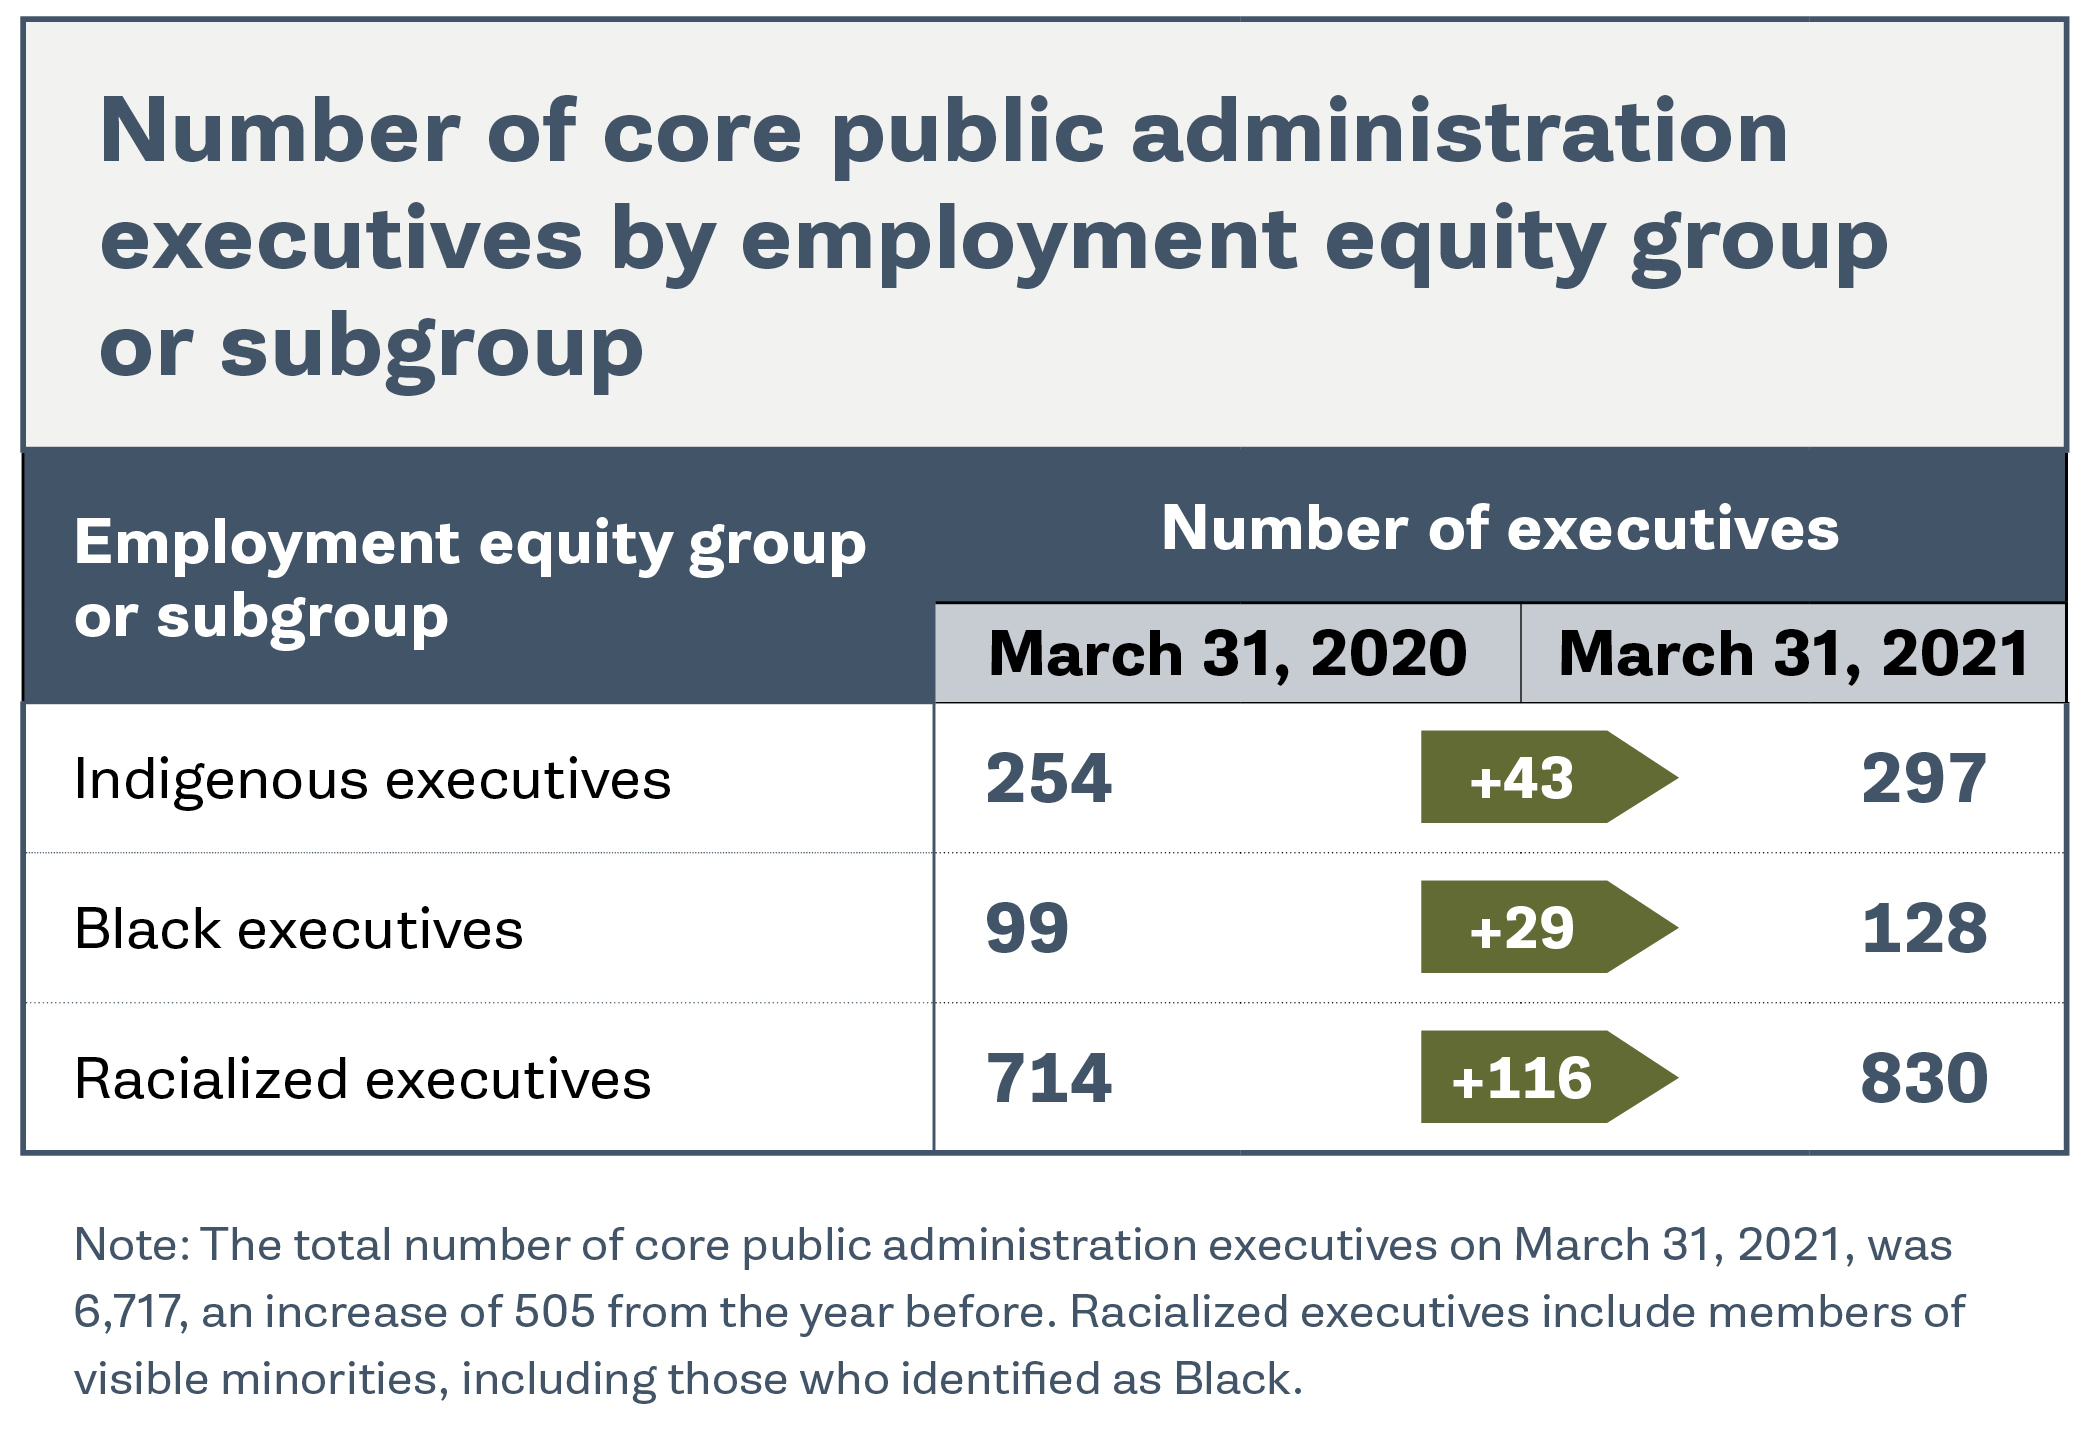 Number of core public administration executives by employment equity group or subgroup